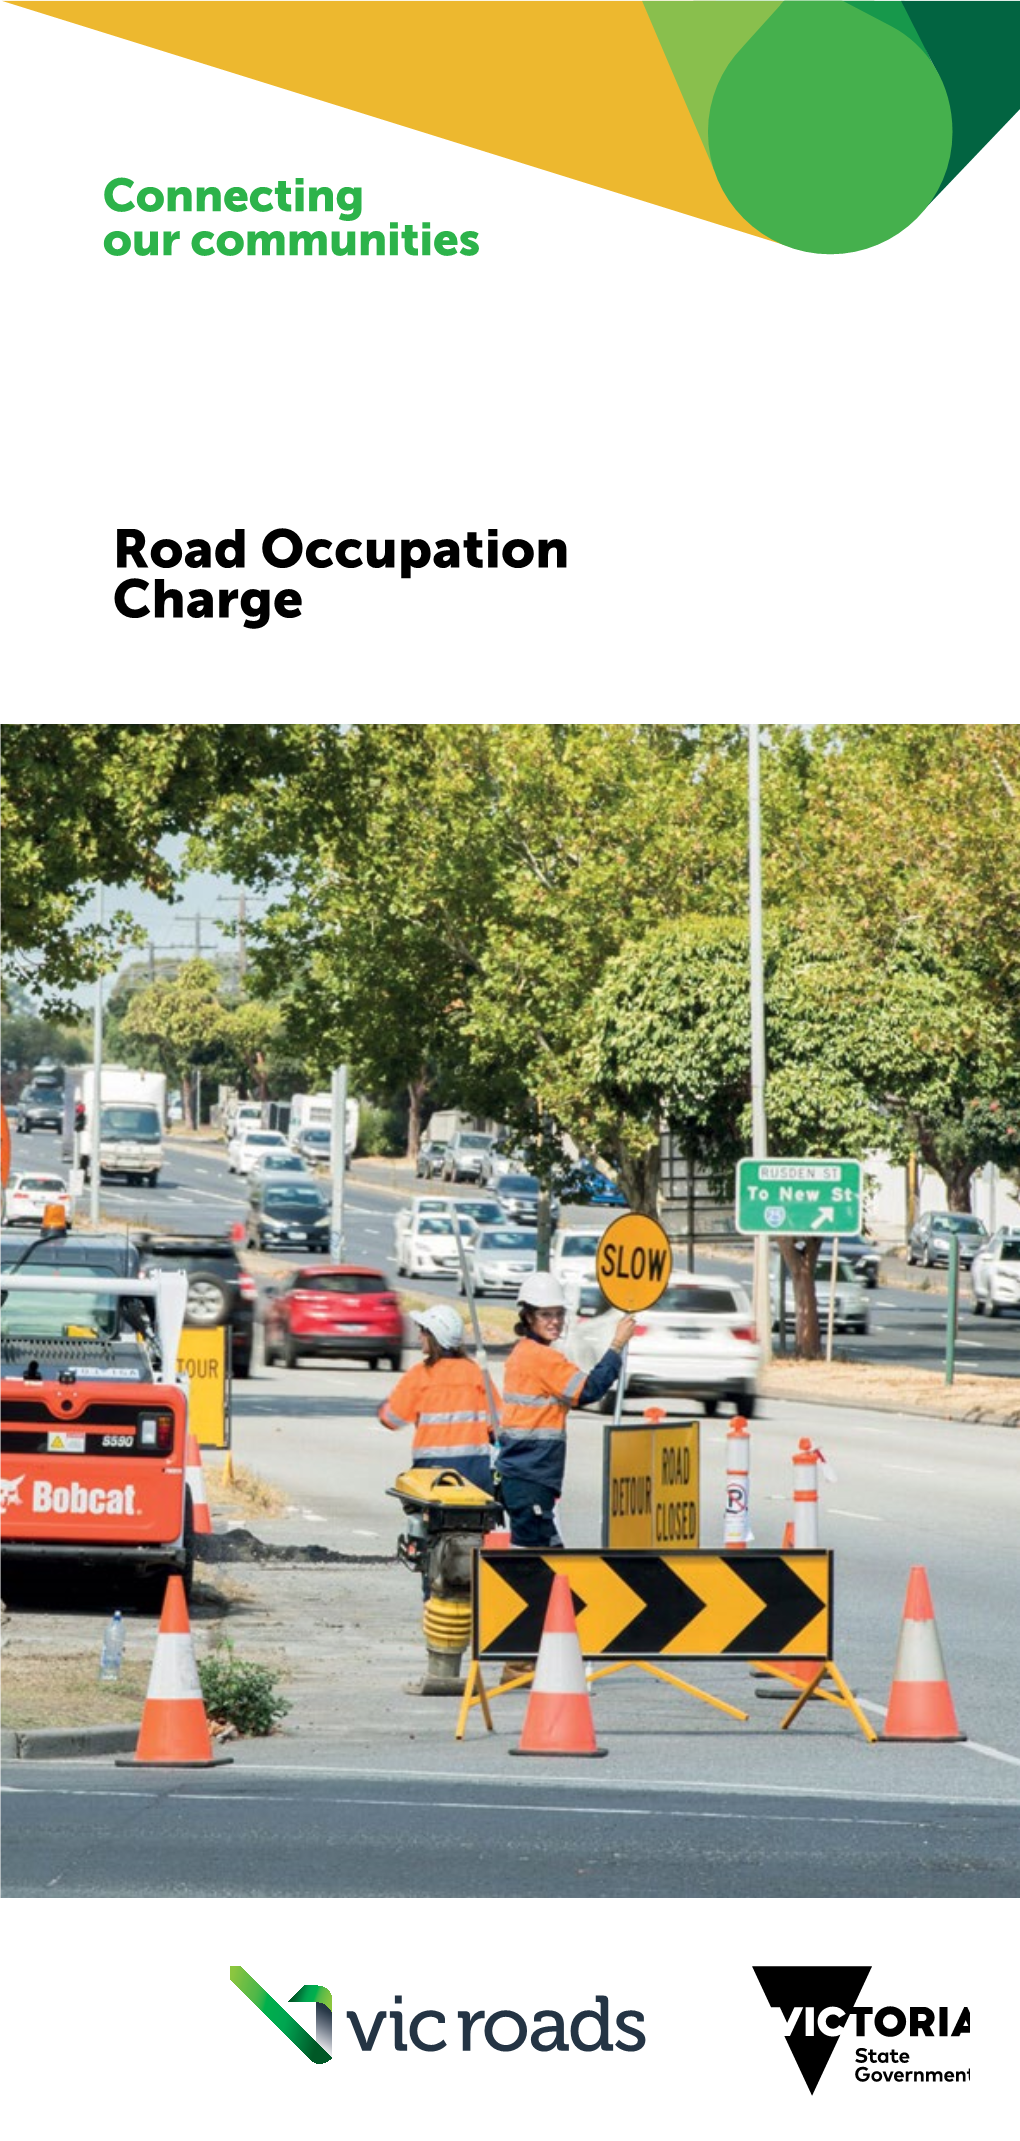 Road Occupation Charge the Victorian Government Is Introducing a Major Initiative to Reduce Traffic Congestion in Inner-City Melbourne